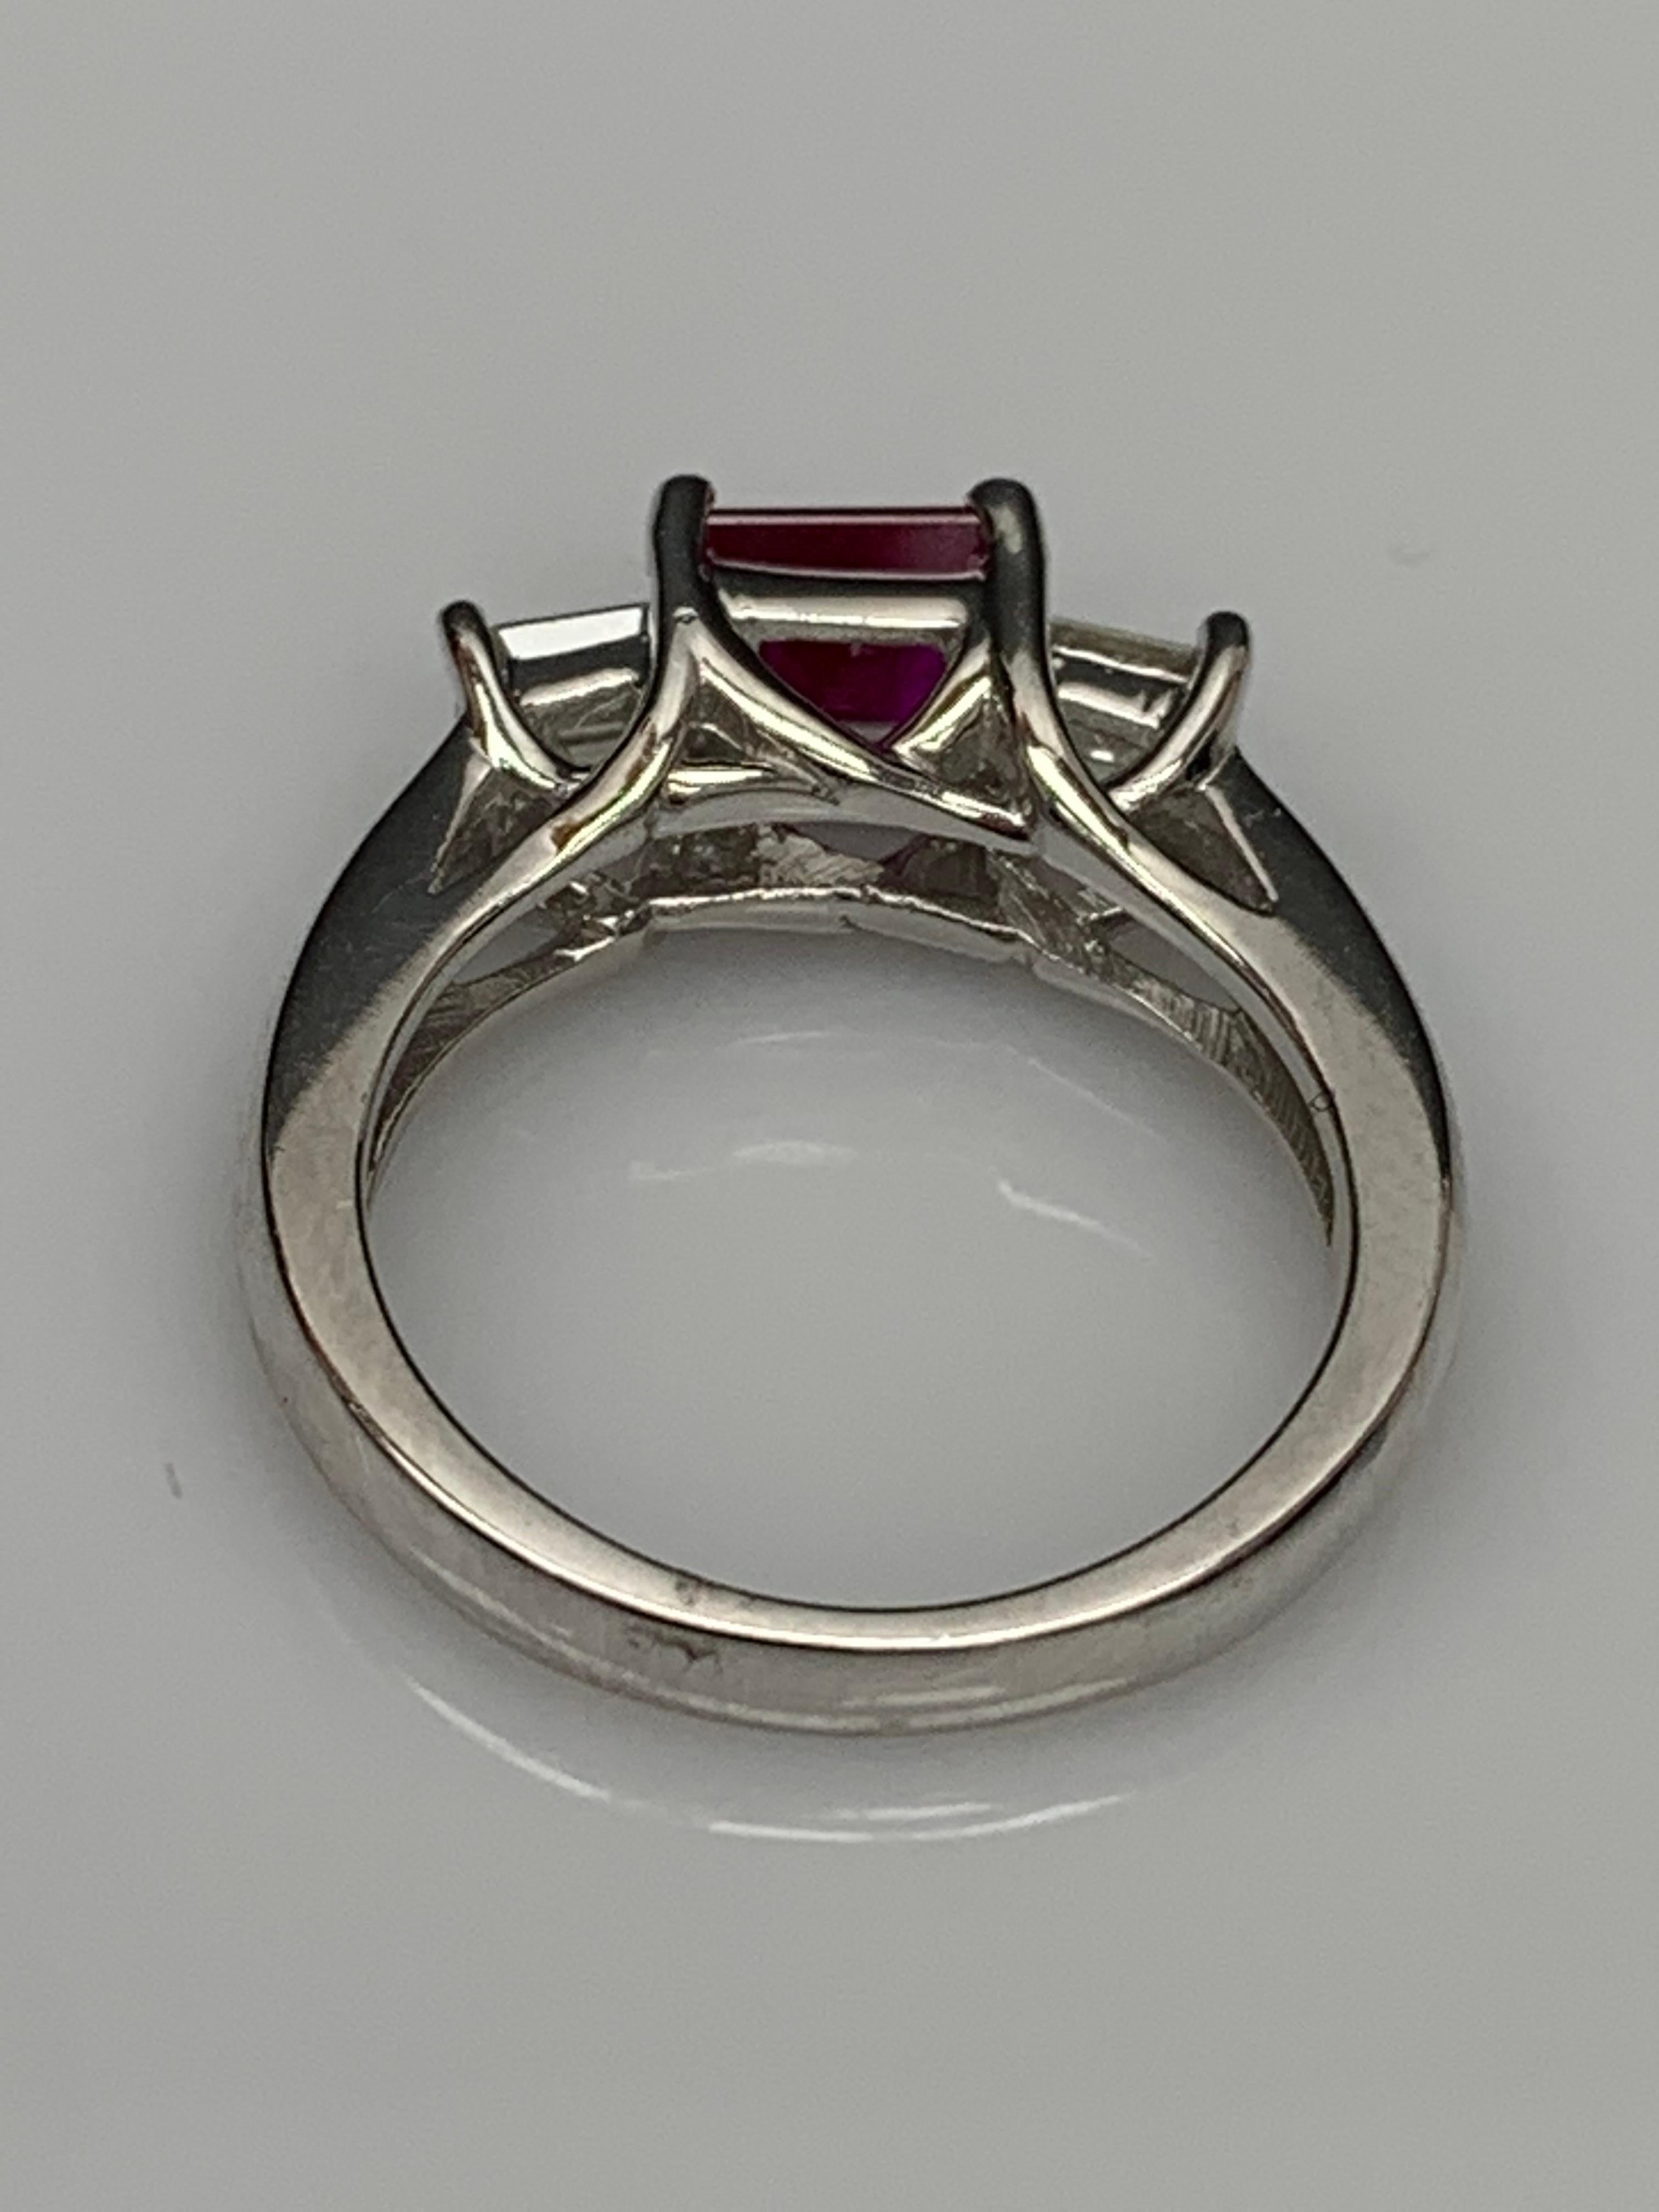 0.92 Carat Emerald Cut Ruby and Diamond Three-Stone Engagement Ring in 14K For Sale 1